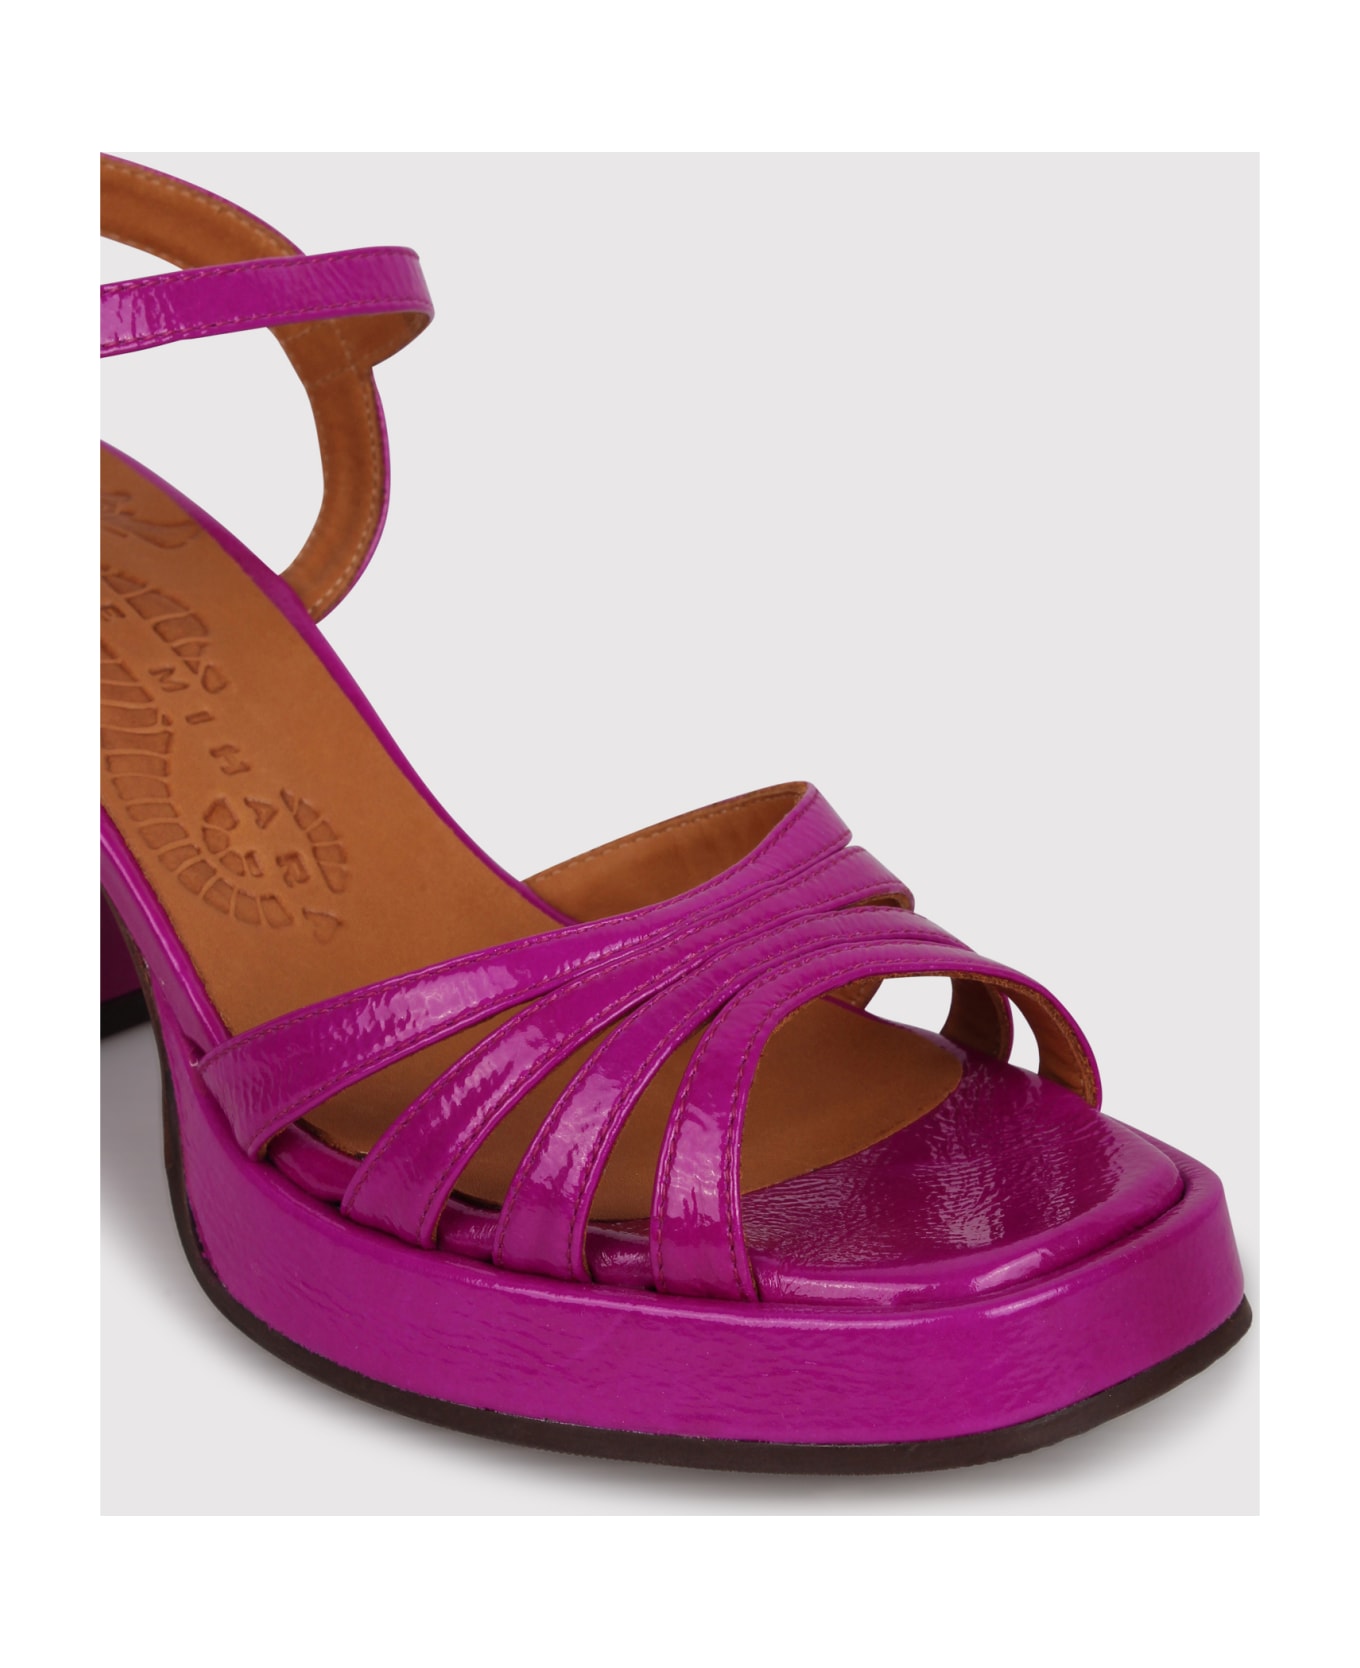 Chie Mihara Naiel 85mm Leather Sandals